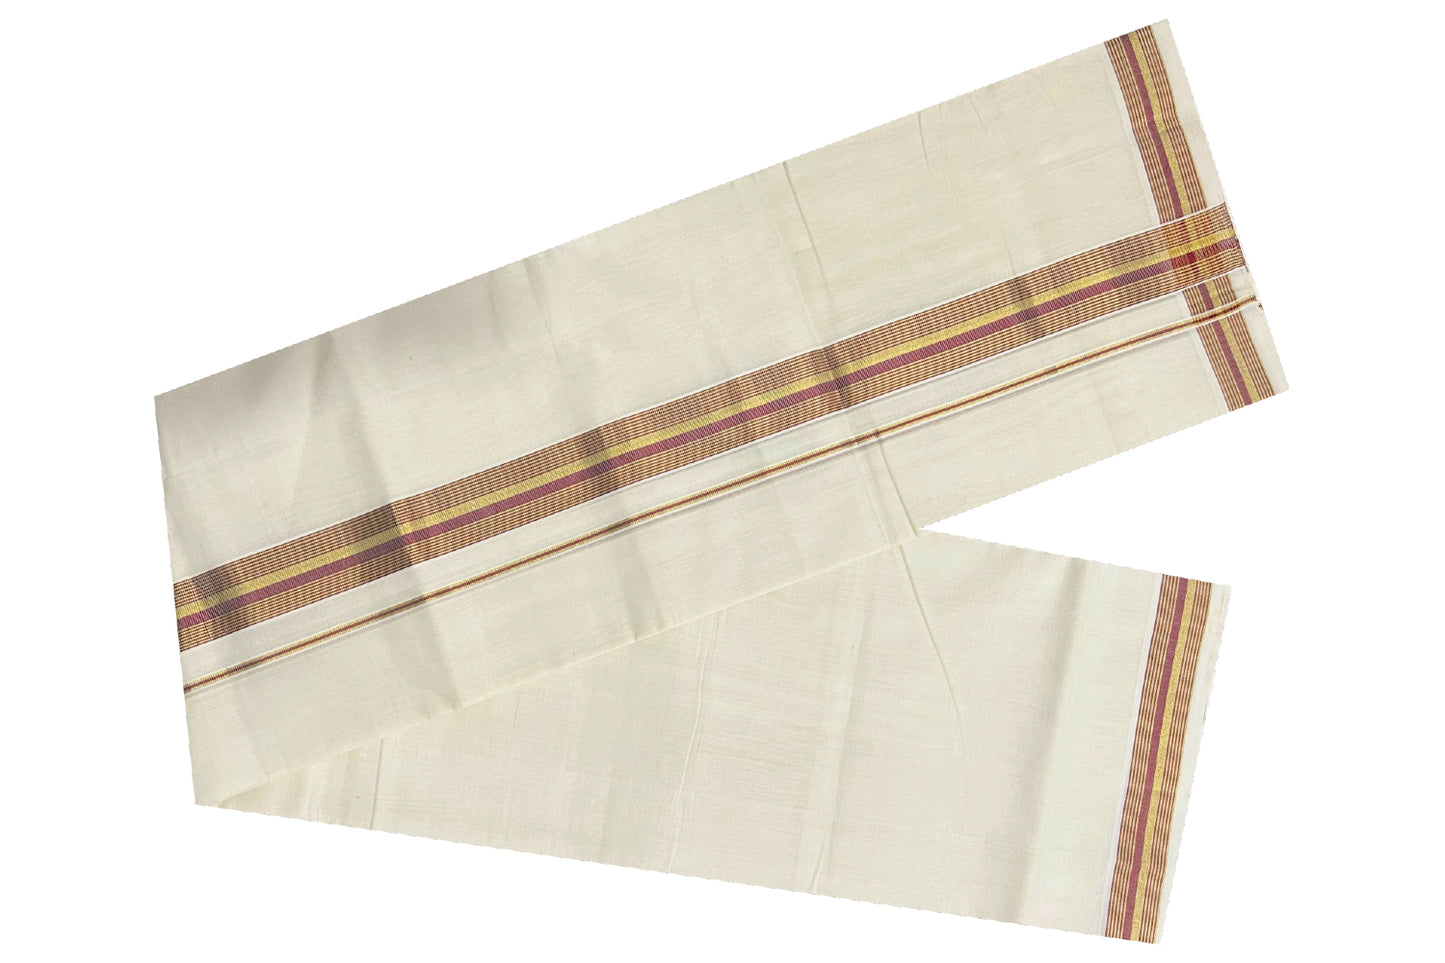 Southloom Kuthampully Handloom Pure Cotton Mundu with Golden and Pink Kasavu Lines Border (South Indian Dhoti)